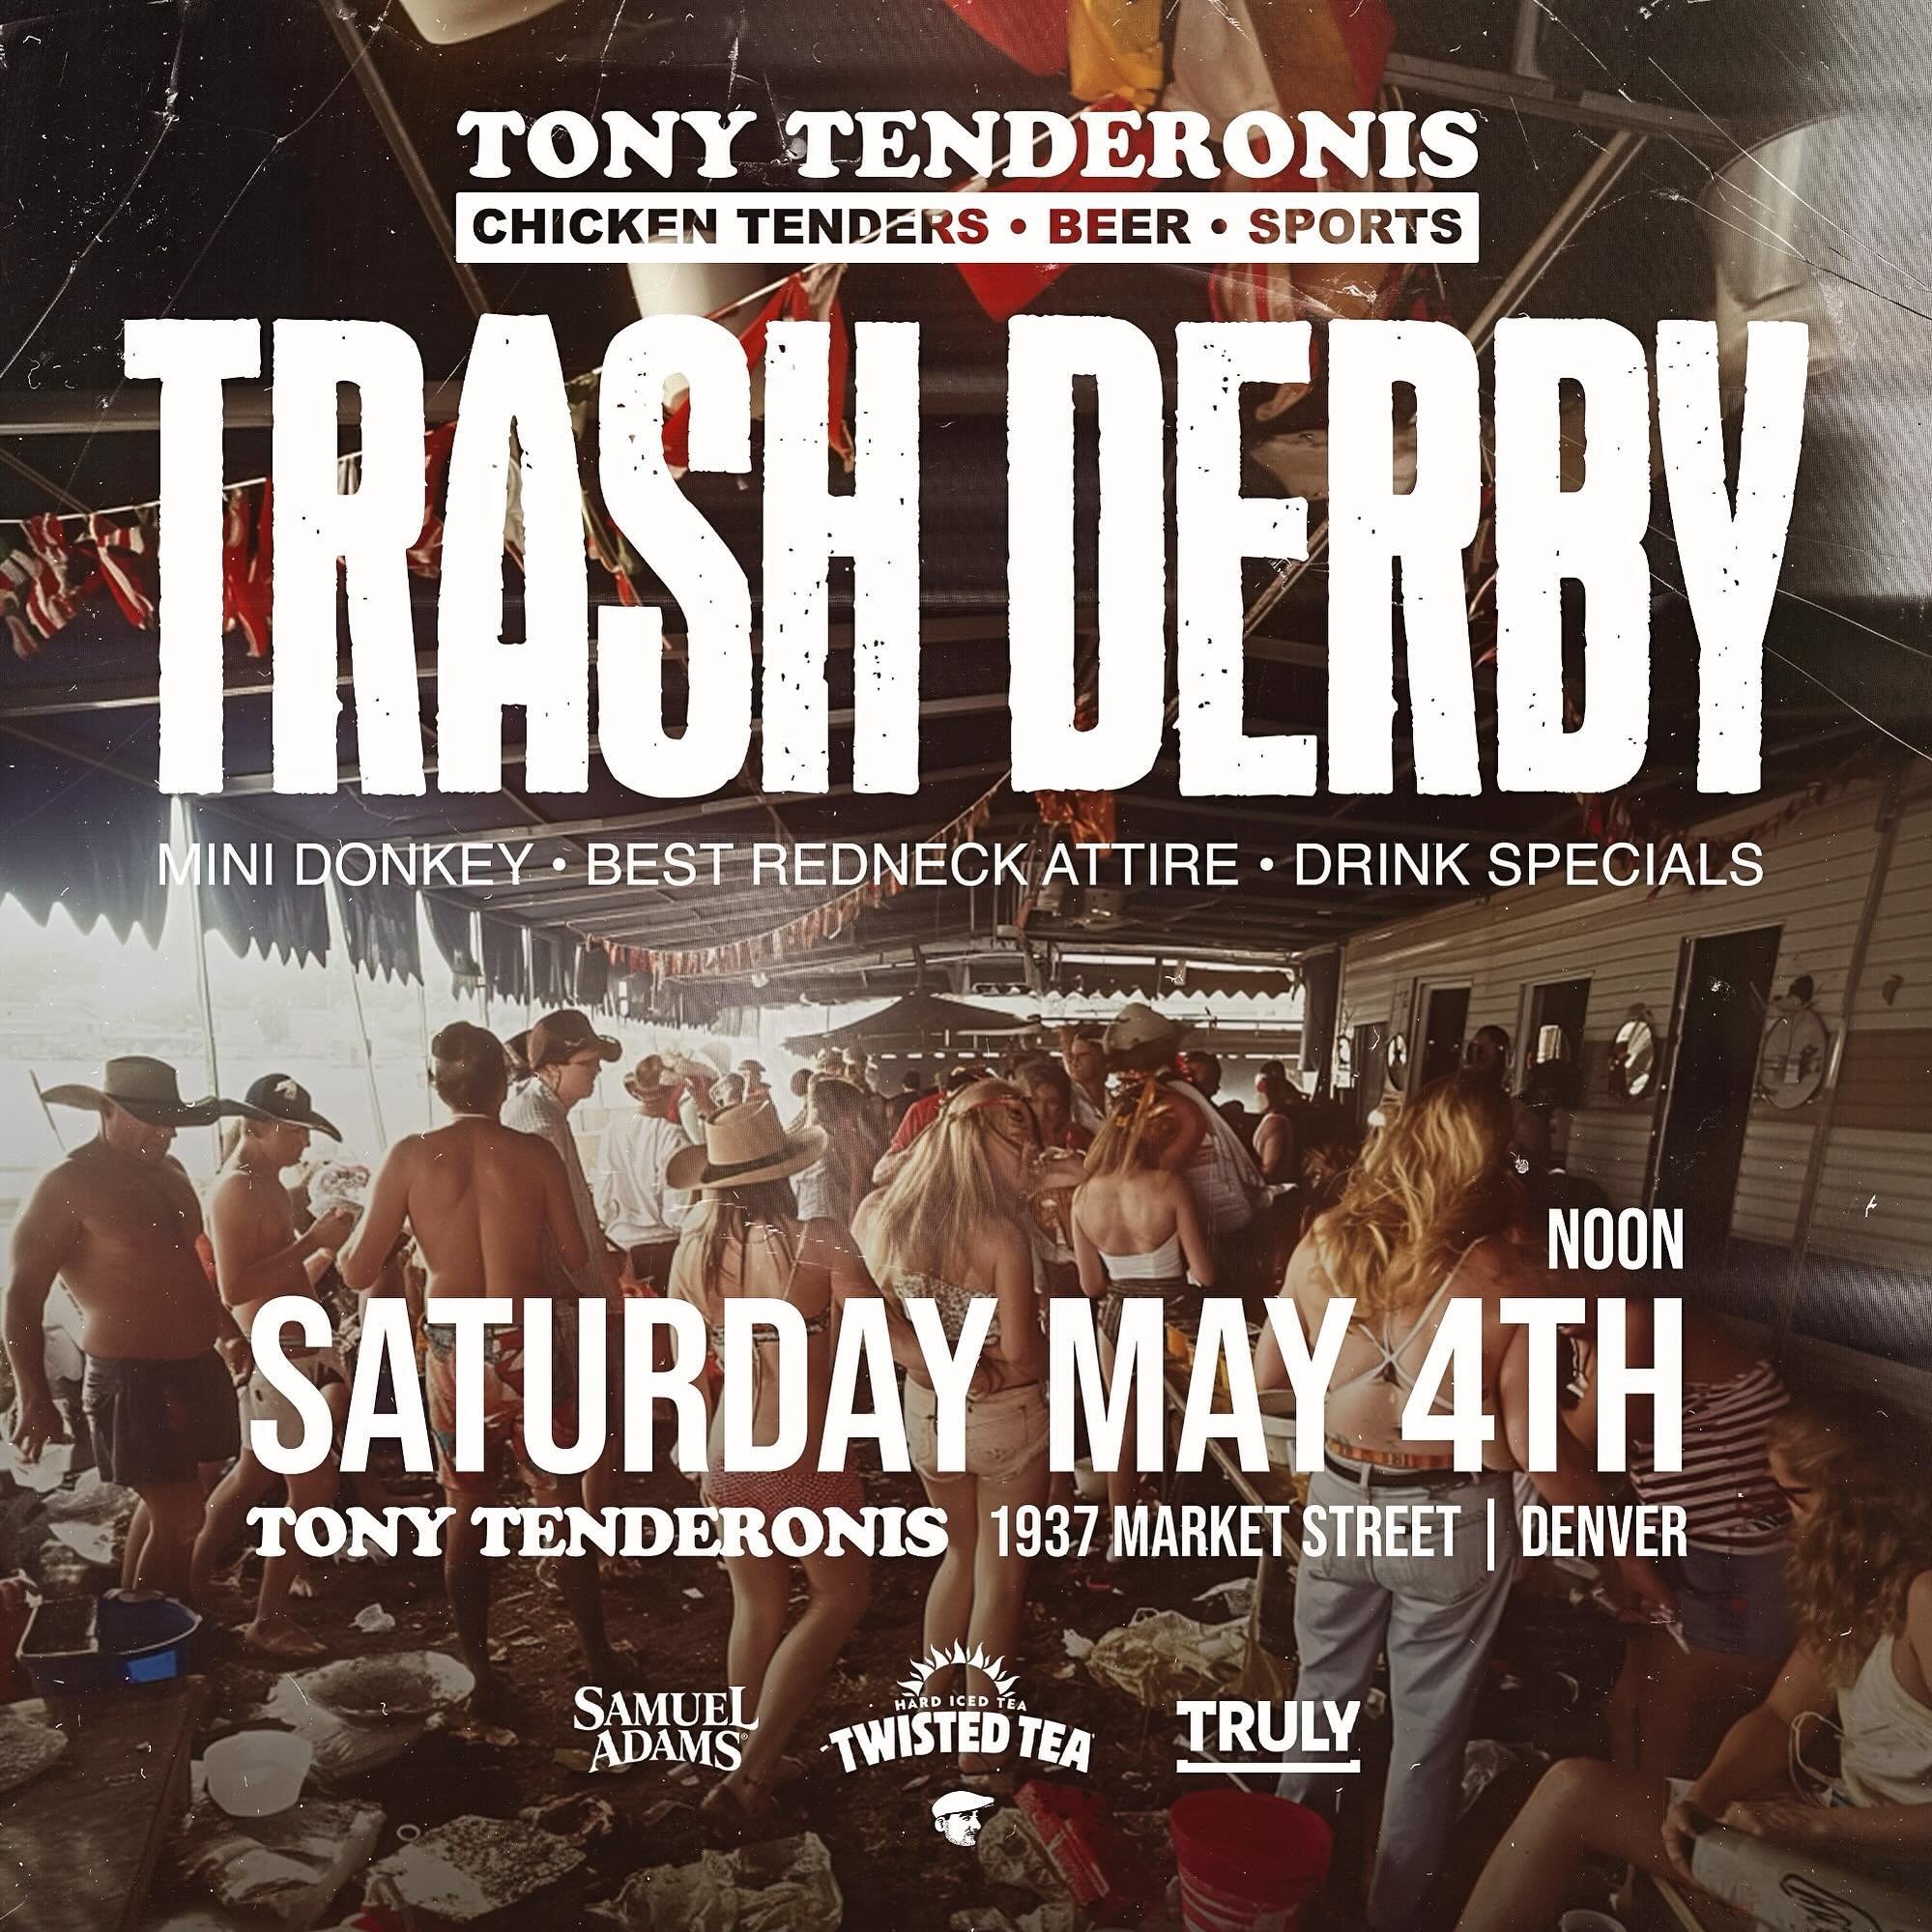 Gather &lsquo;round, y&rsquo;all! Tony Tenderonis&rsquo; Trash Derby is fixin&rsquo; to be a hoot&rsquo;nanny! Mini donkeys, the best darn redneck getups, and more giggles than a hen in a coop! Get your fill of chicken &lsquo;n&rsquo; beer specials a